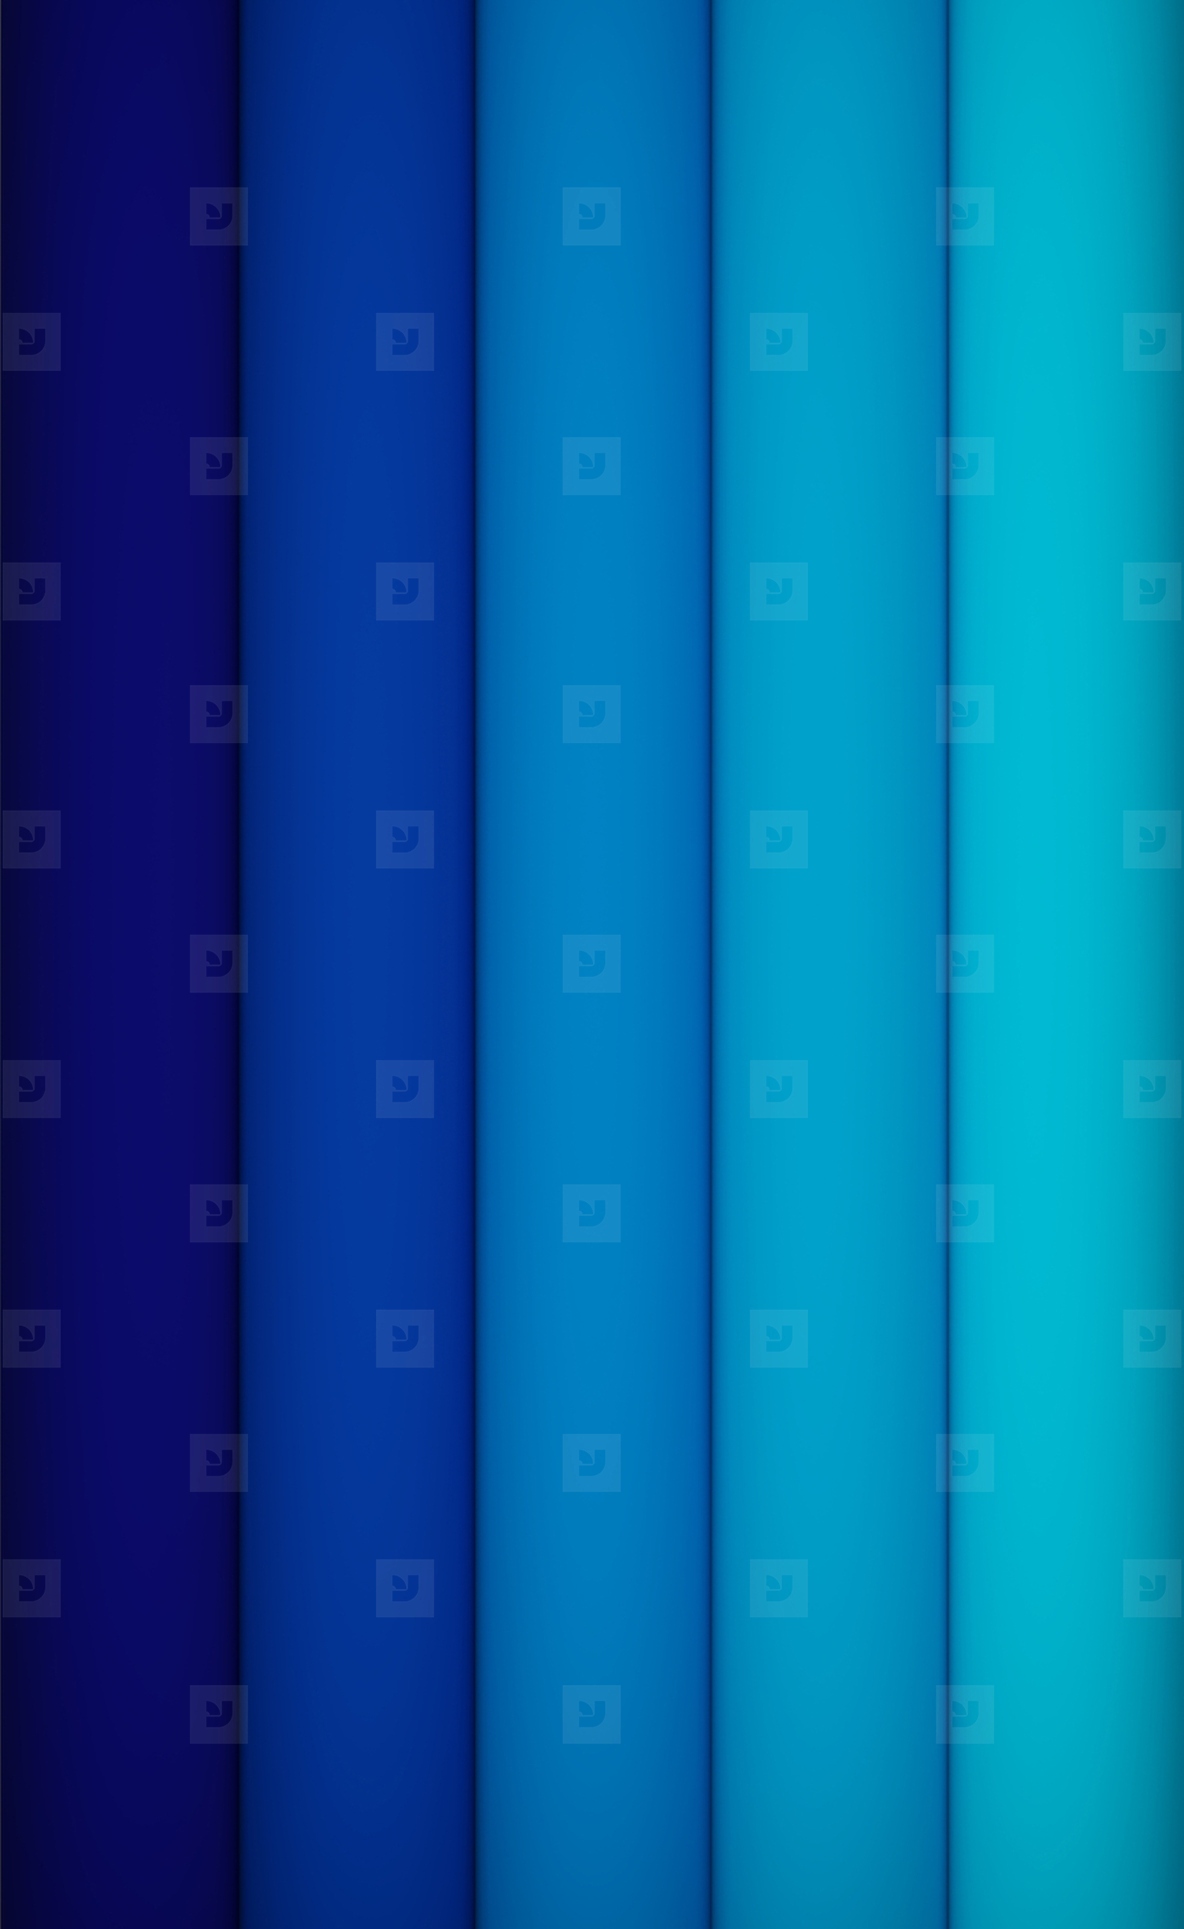 Five vertical lines with different colors  3d render  3d illustraction